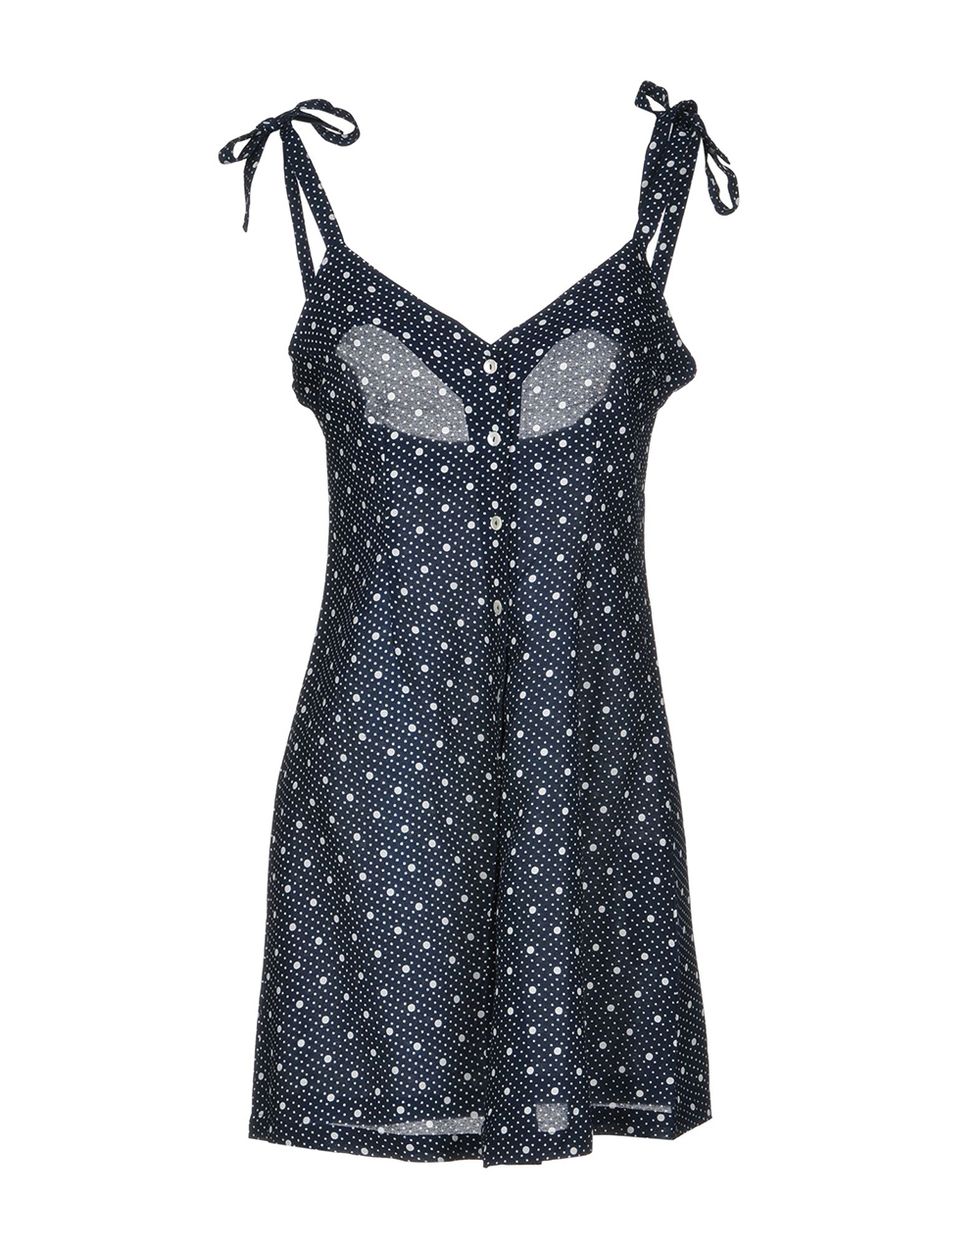 Clothing, Dress, Day dress, Cocktail dress, Pattern, camisoles, Design, Textile, Nightgown, Neck, 